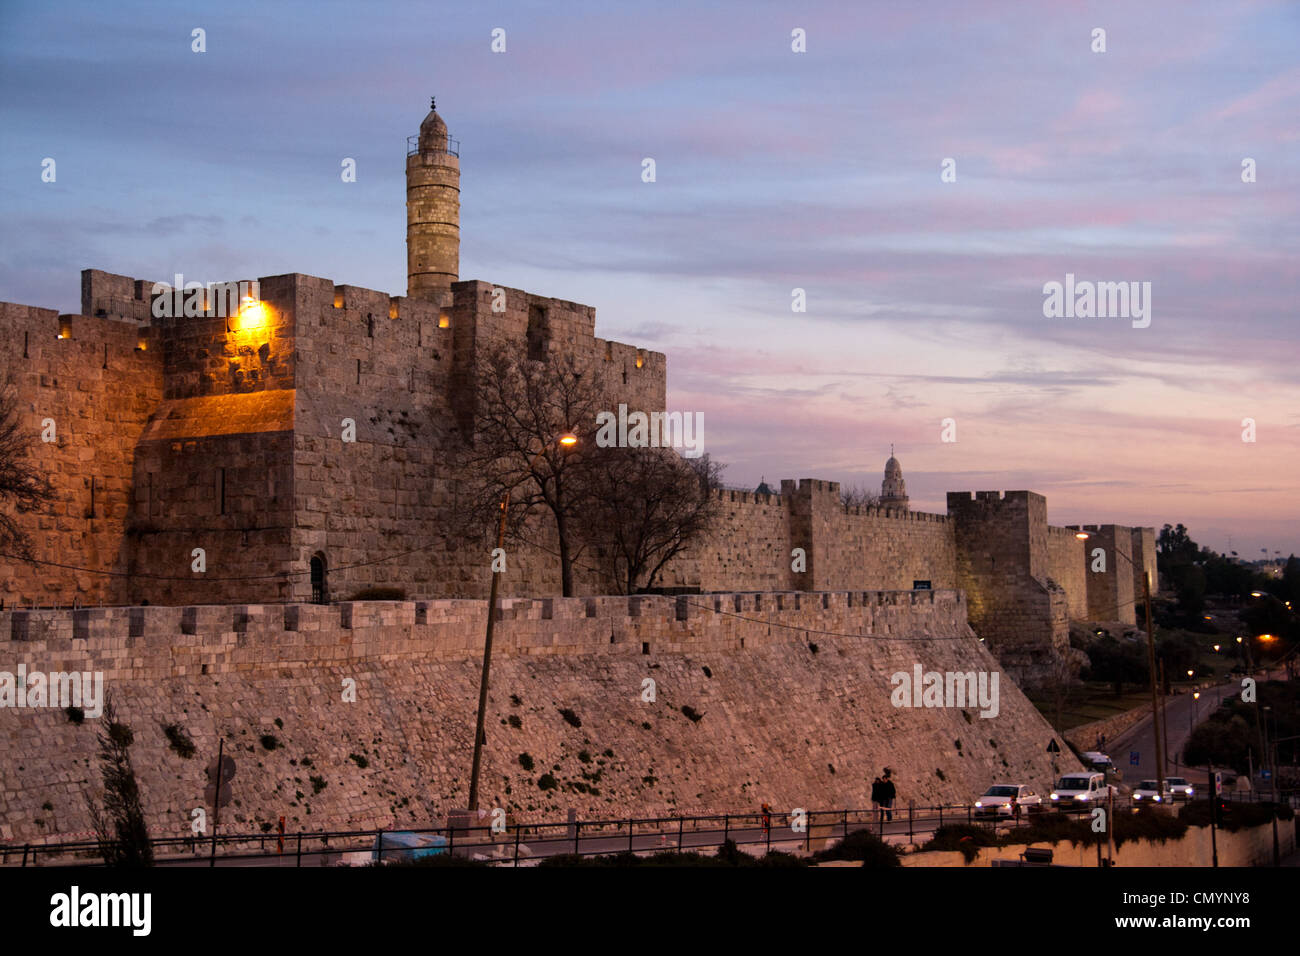 Tower of David citadel in the old city of Jerusalem at sunset. Stock Photo